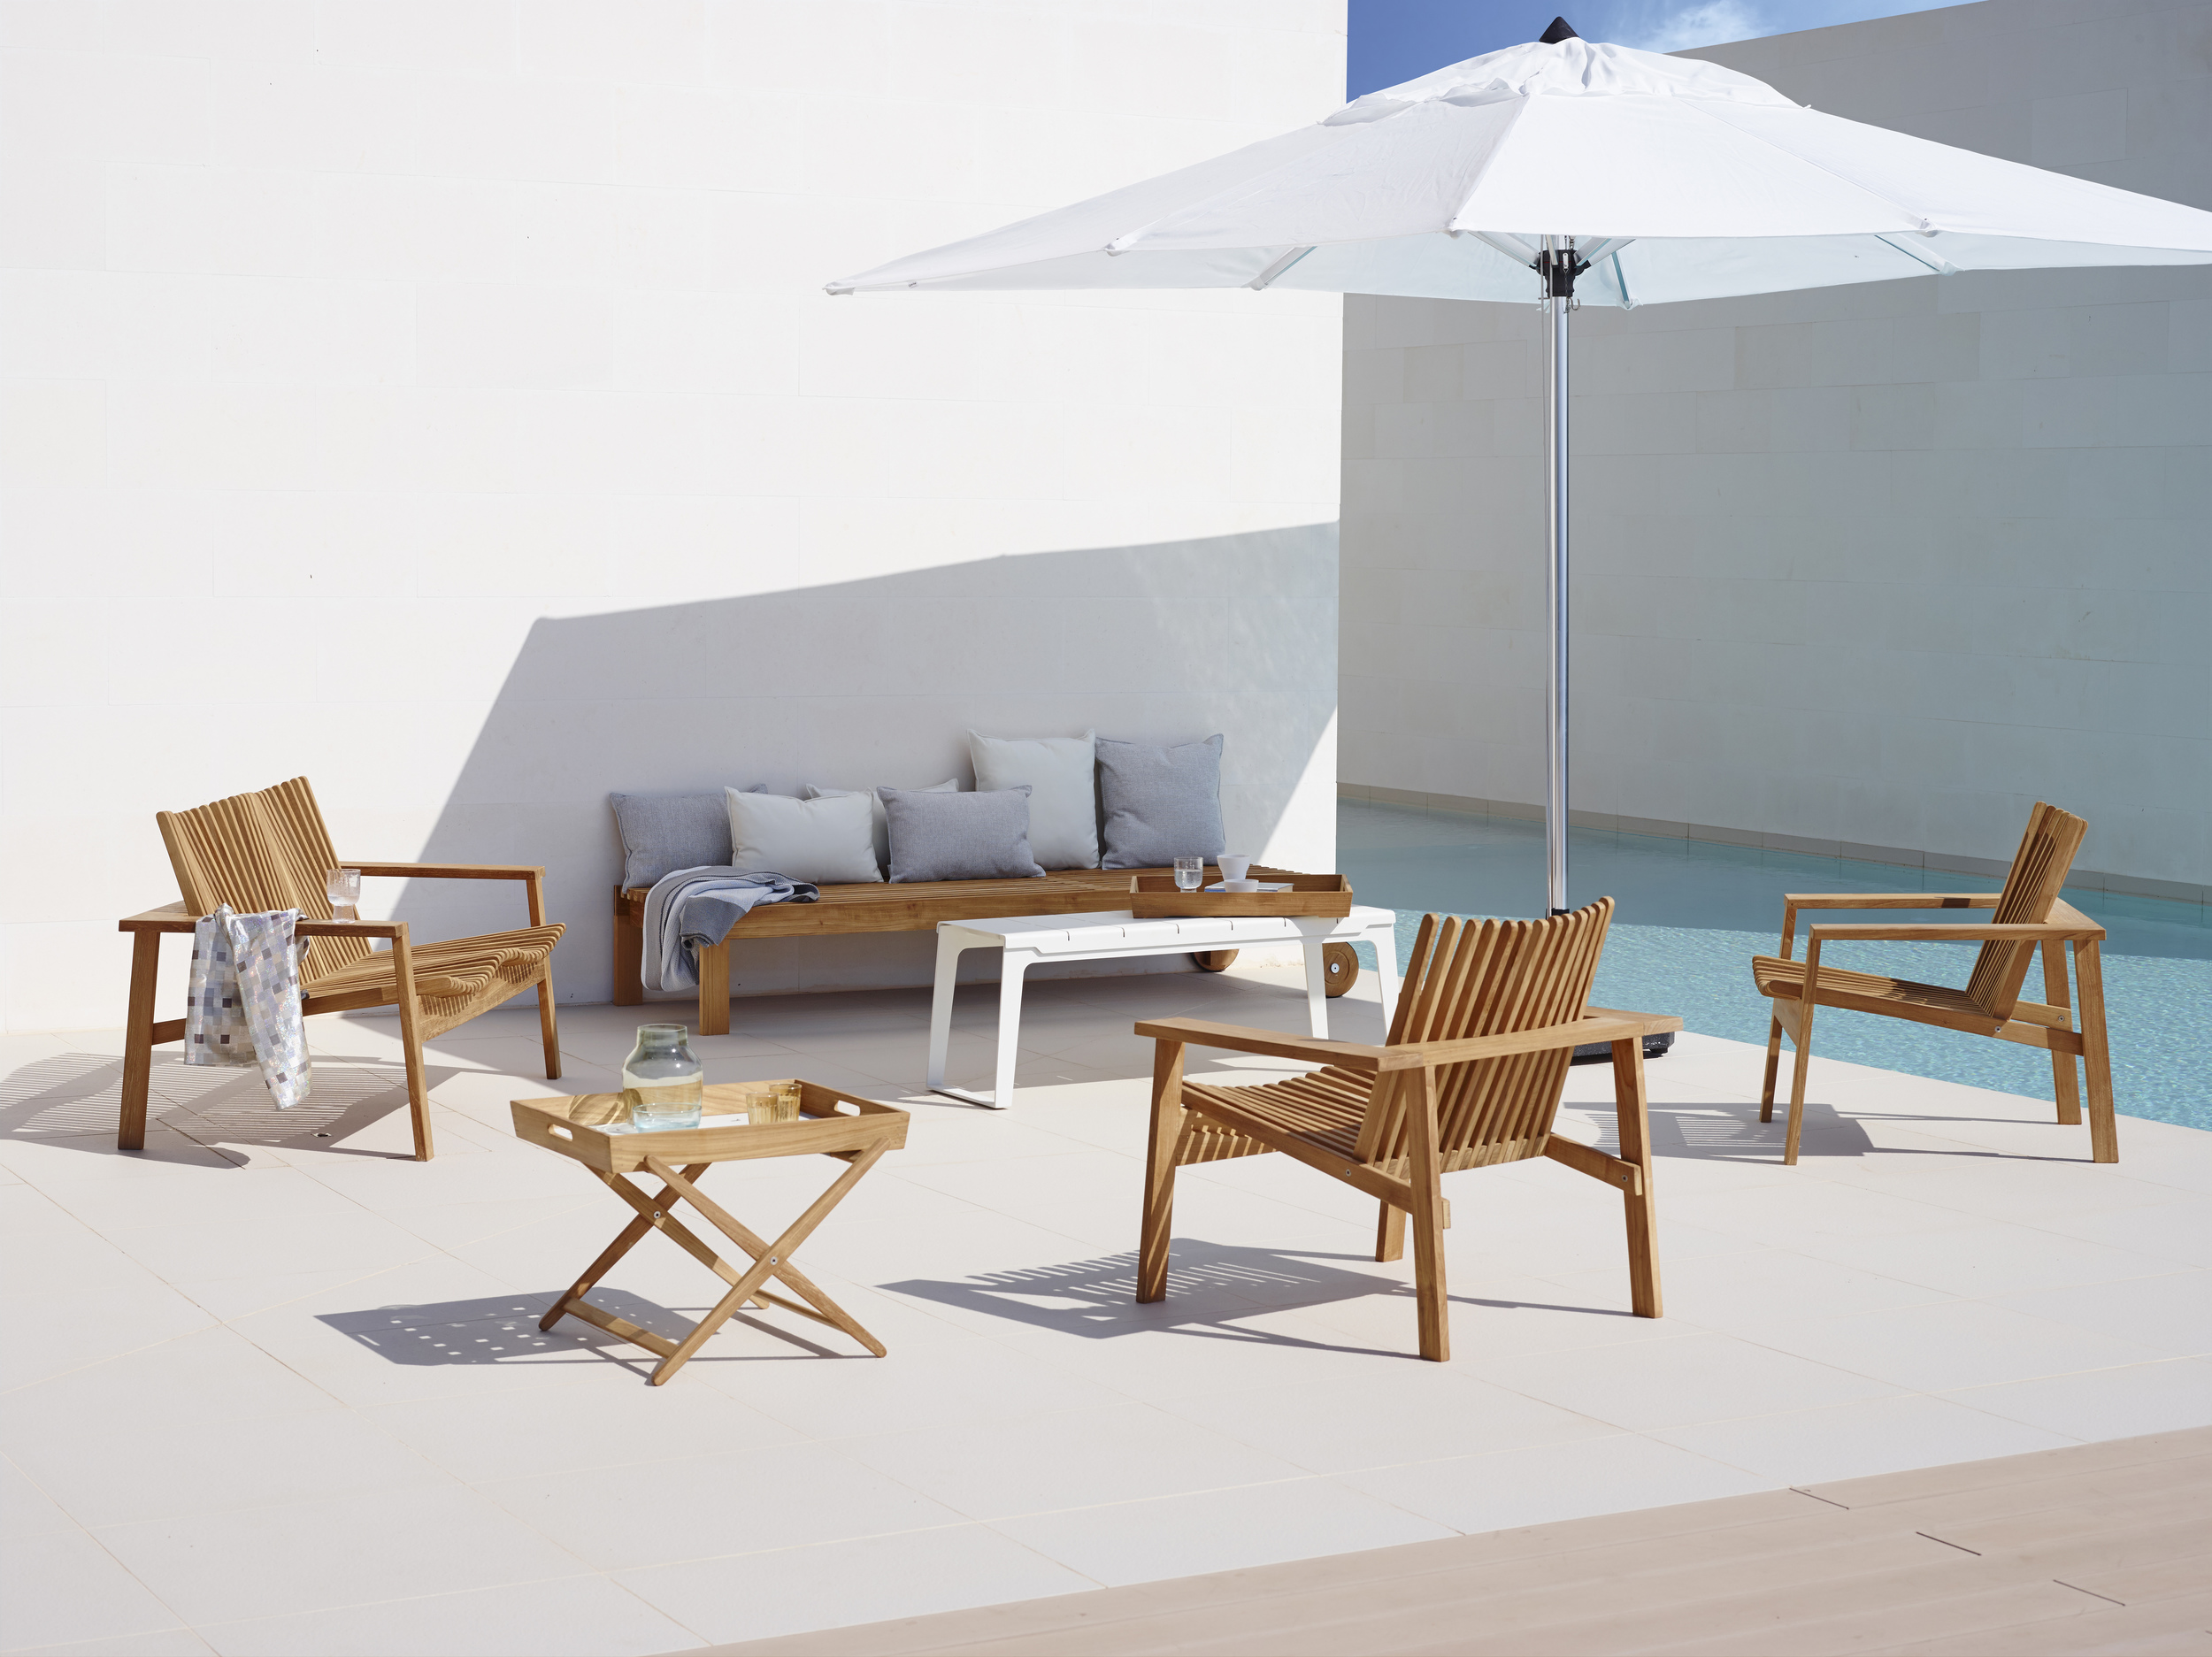 Cane-line Amaze Outdoor Furniture collection